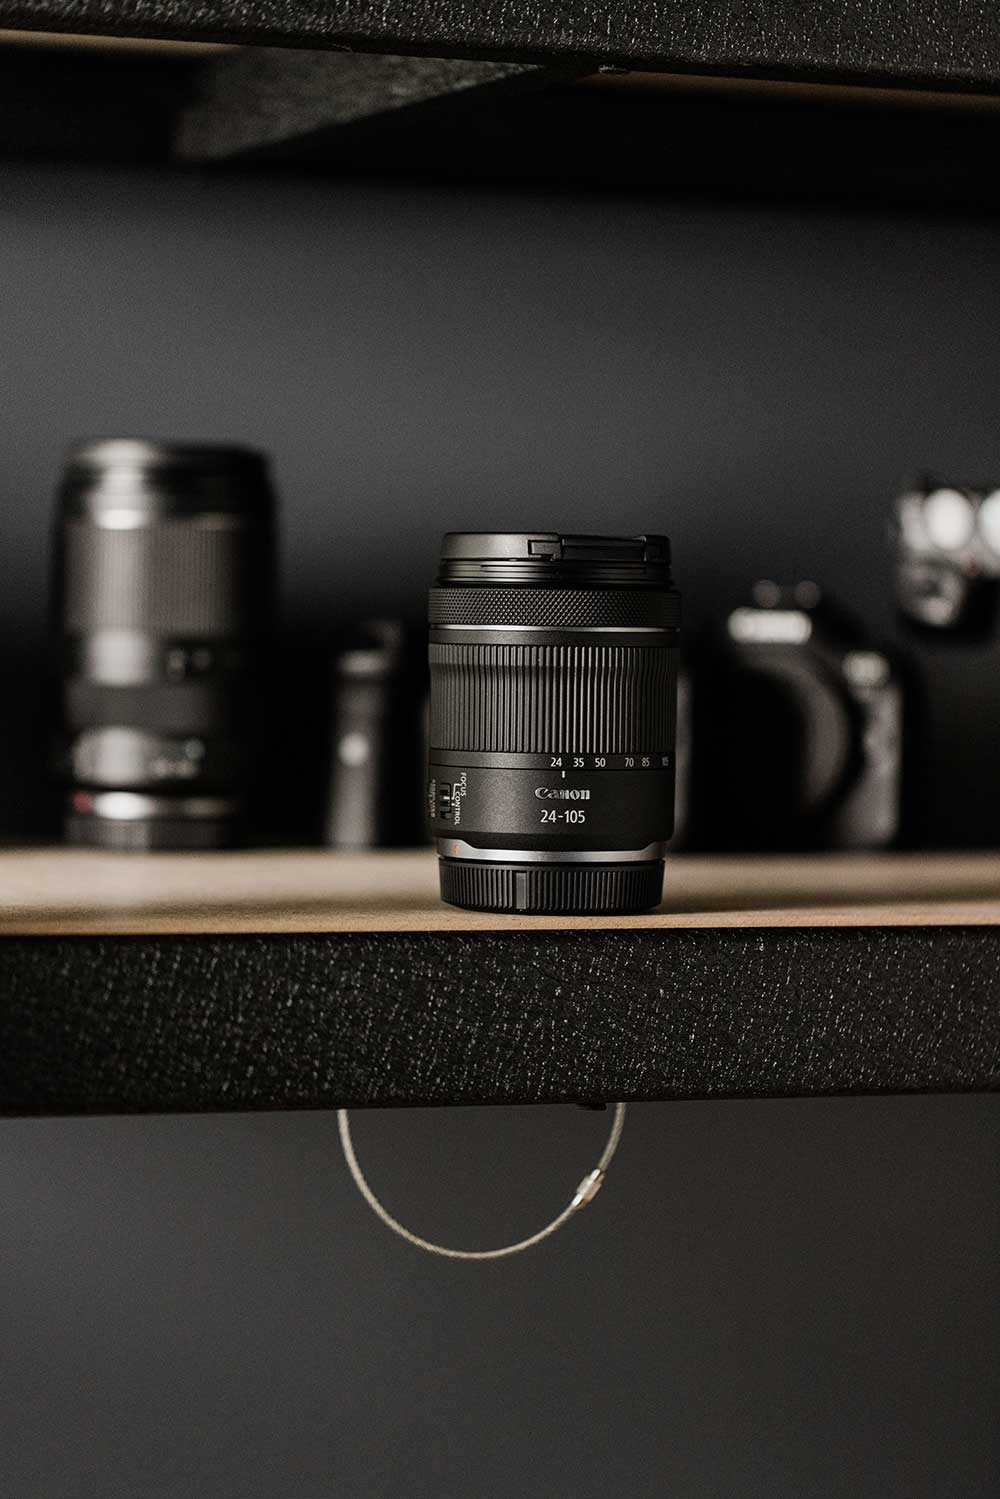 Image of Canon lens on a shelf